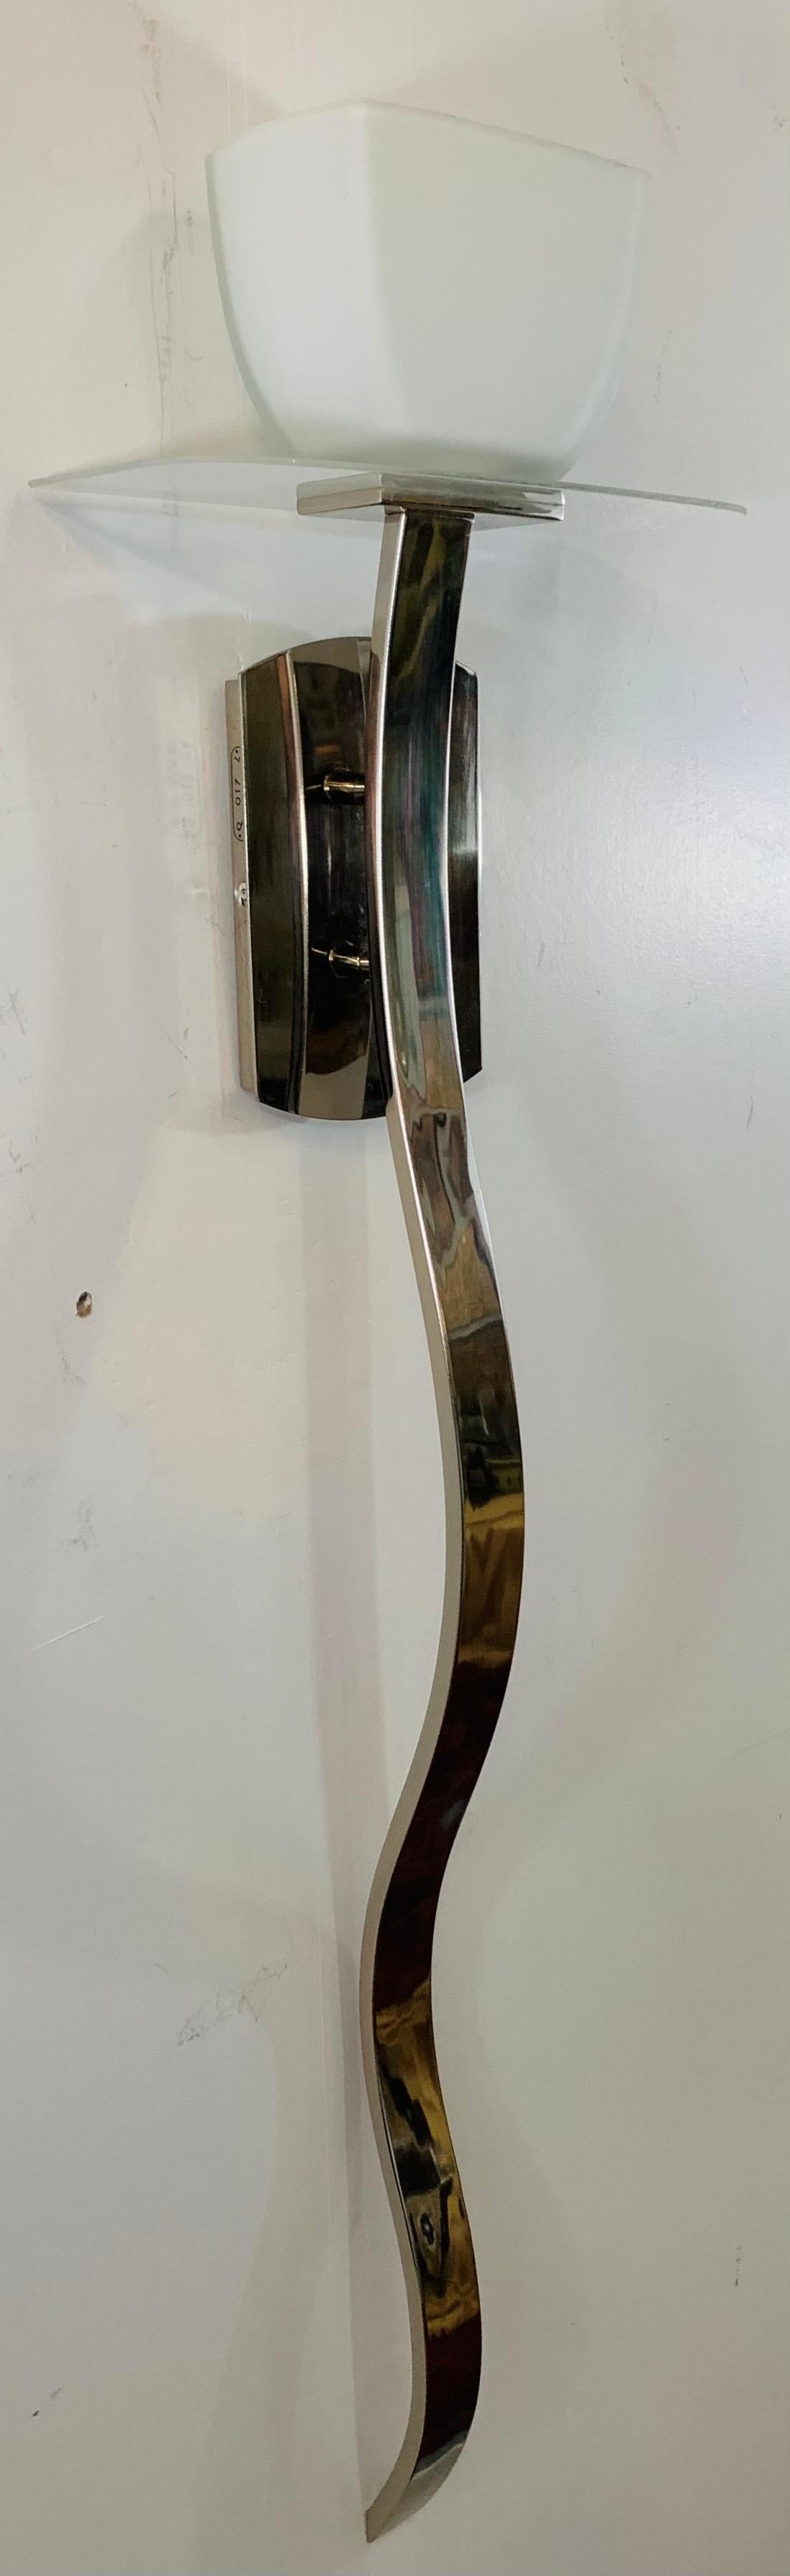 A very stylish Mid-Century Modern pair of Italian chrome wall sconces. The sconces contemporary Cobra wavy design is highly attractive adding character to the pieces. The wall sconces also features beautiful opaline shades.

Dimensions: 44